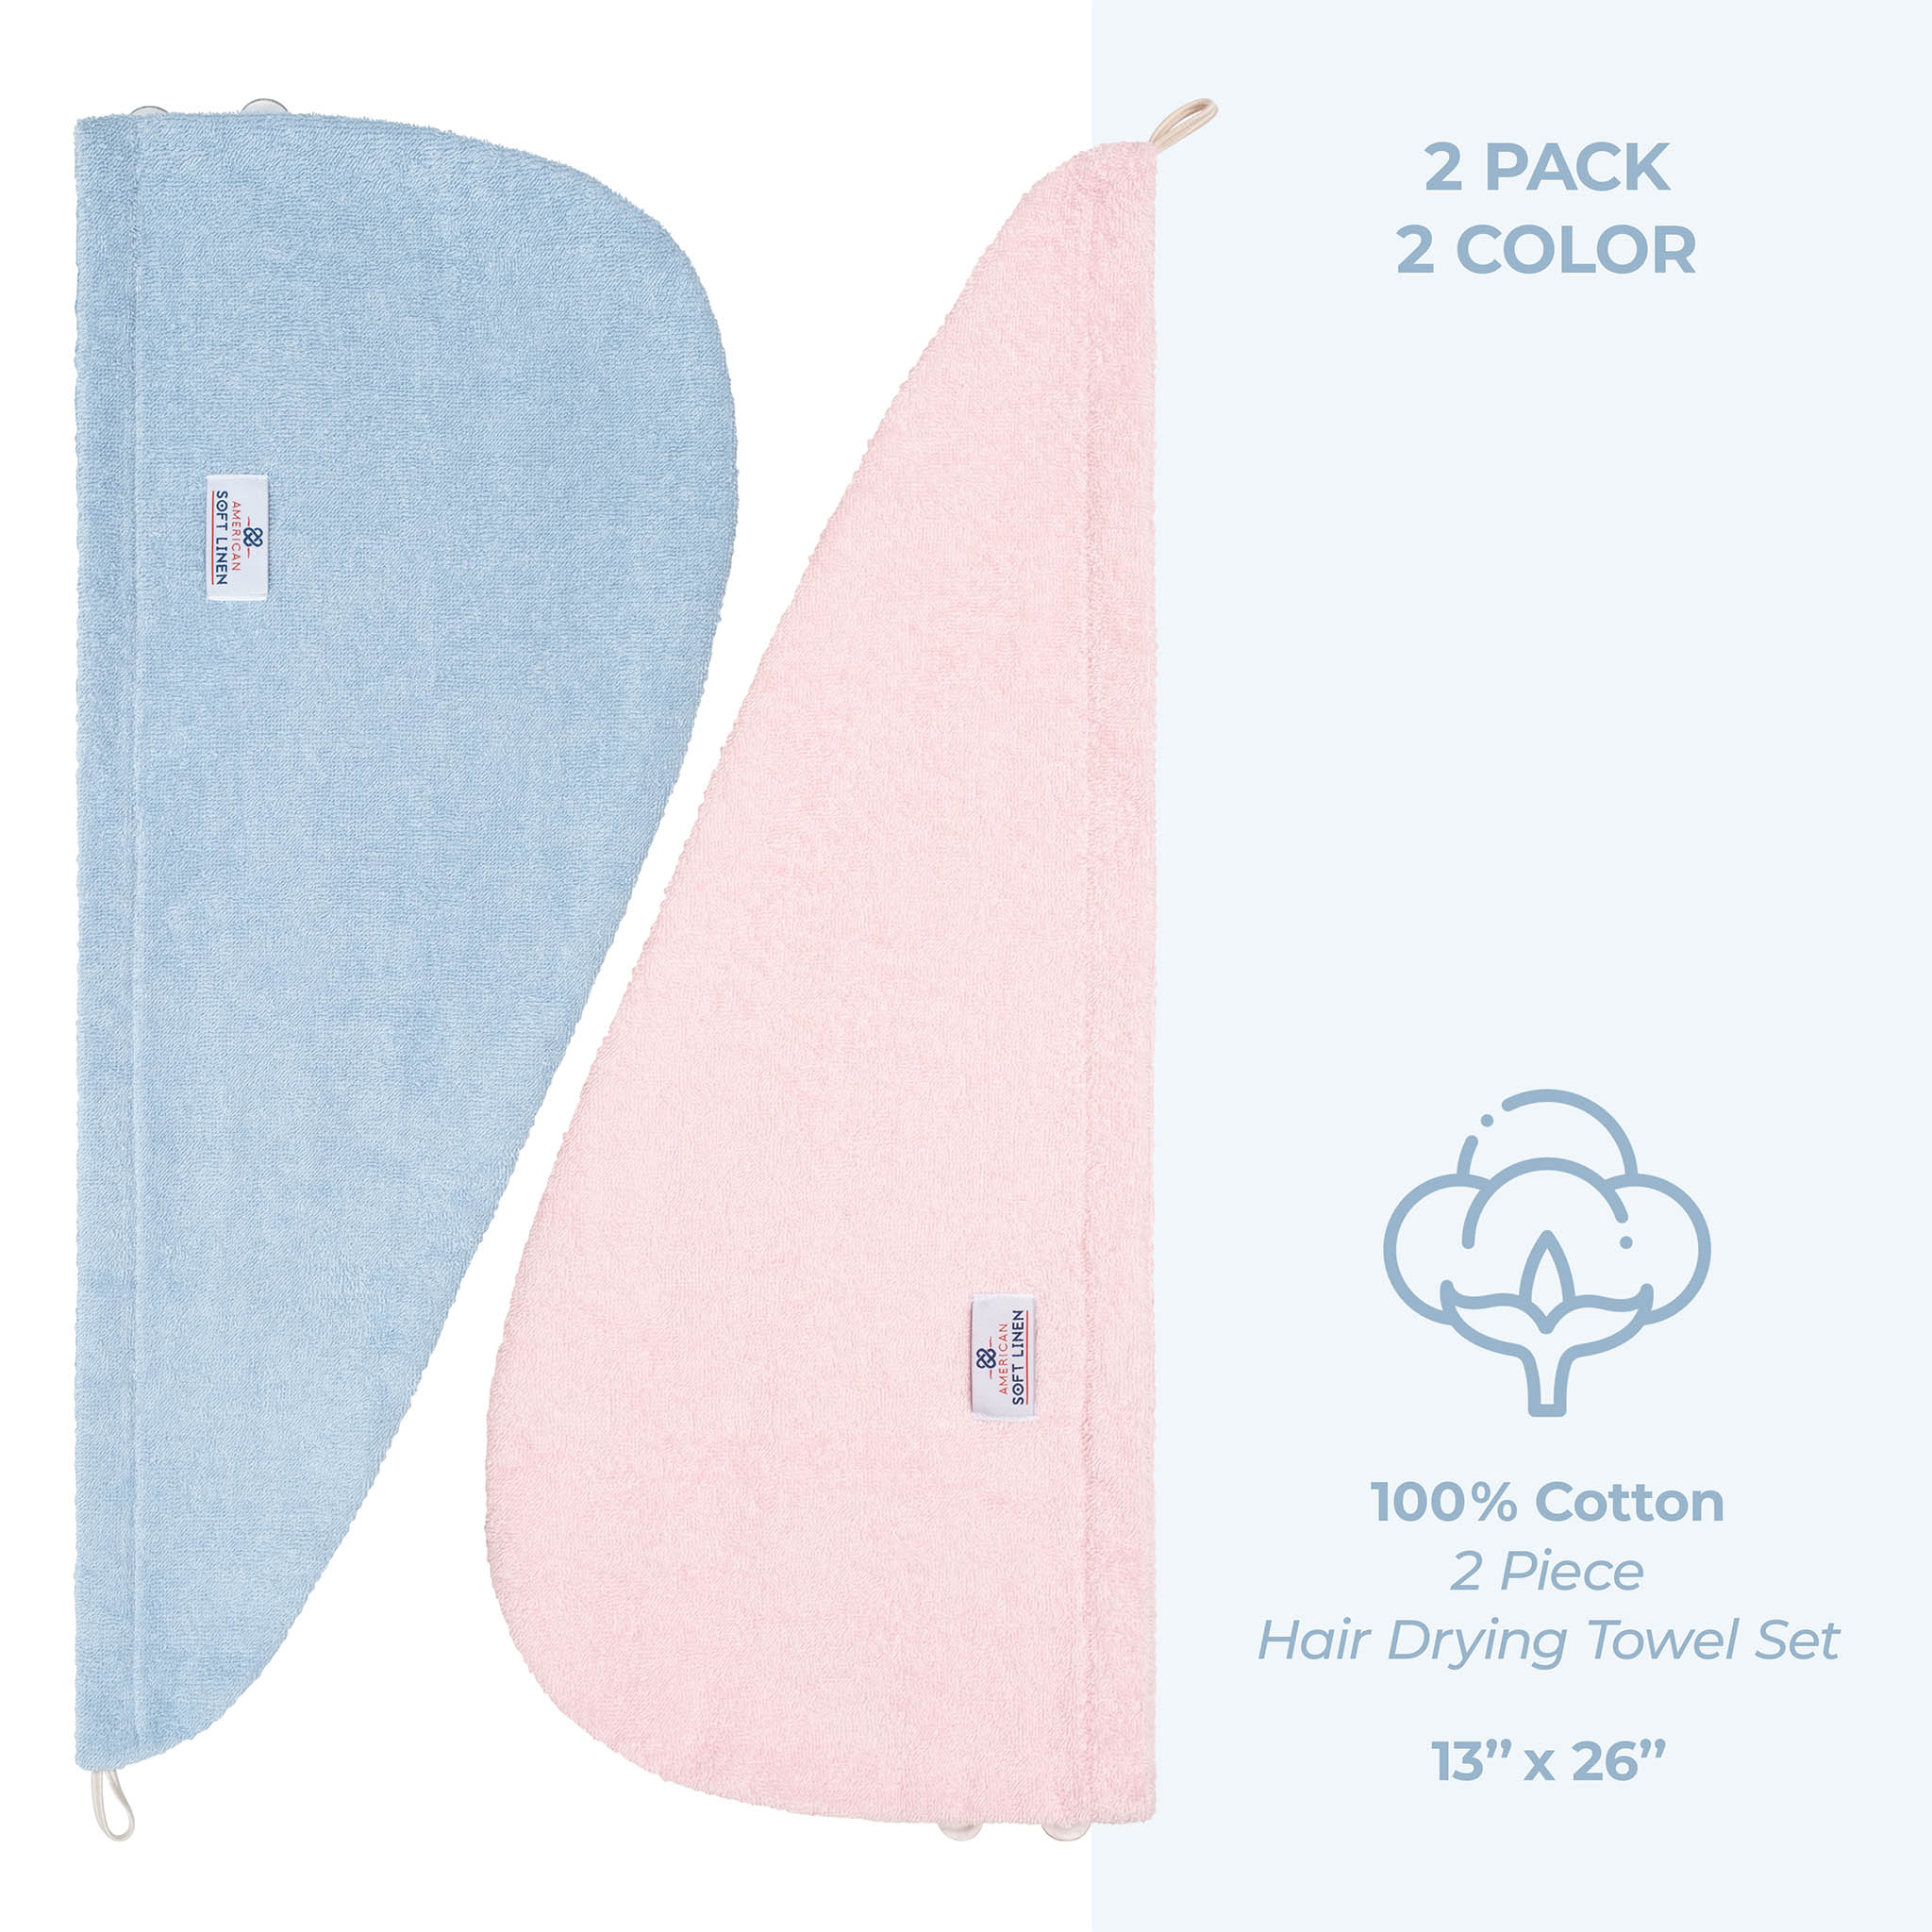 American Soft Linen 100% Cotton Hair Drying Towels for Women 2 pack 75 set case pack sky blue-pink-5